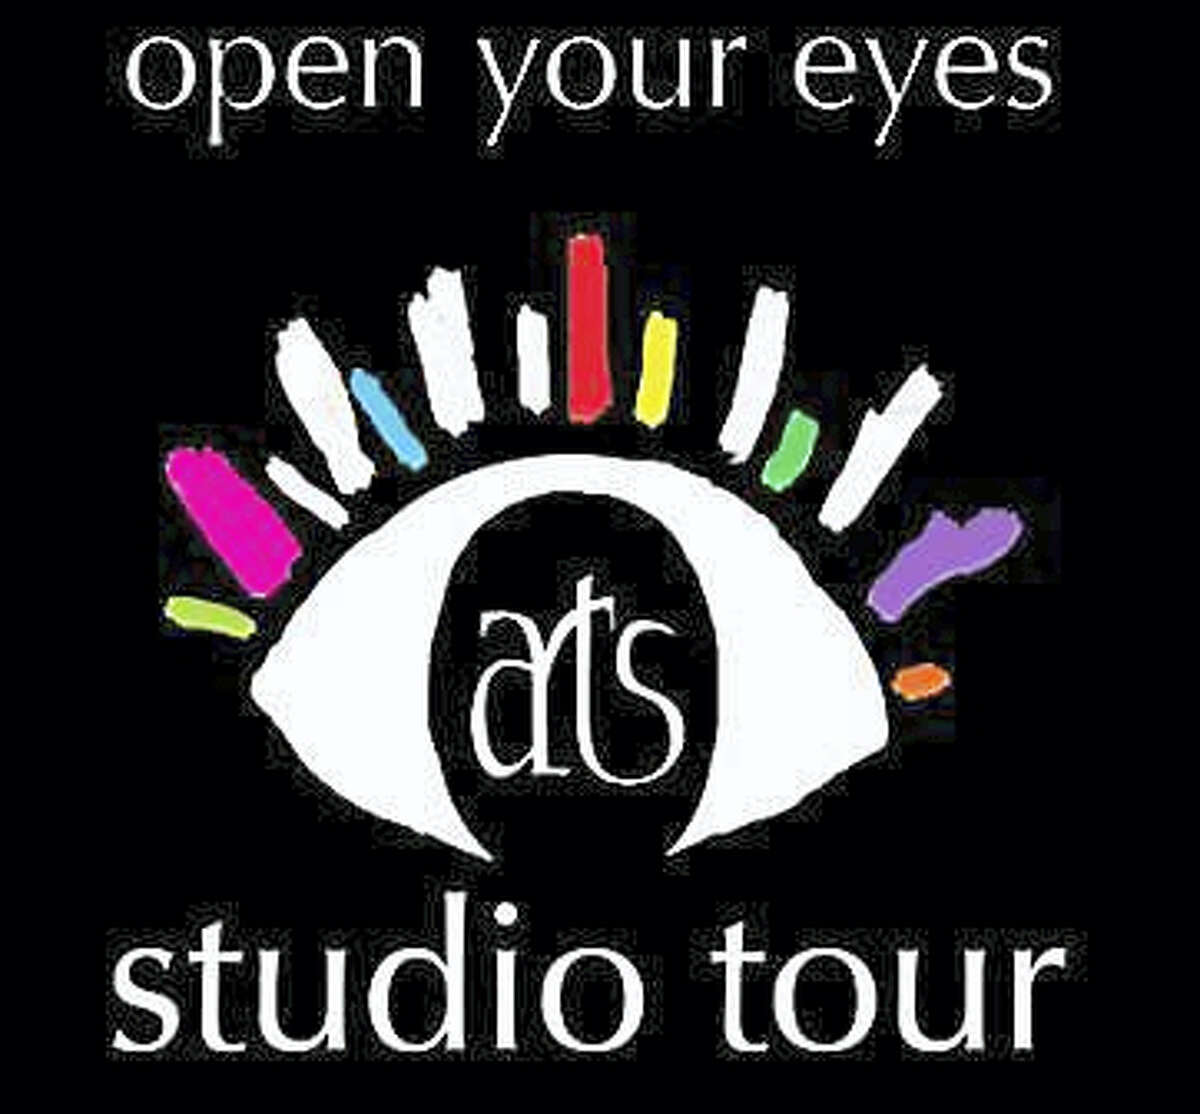 Contributed photoArtists are invited to participate in this year's Open Your Eyes open studio tour.